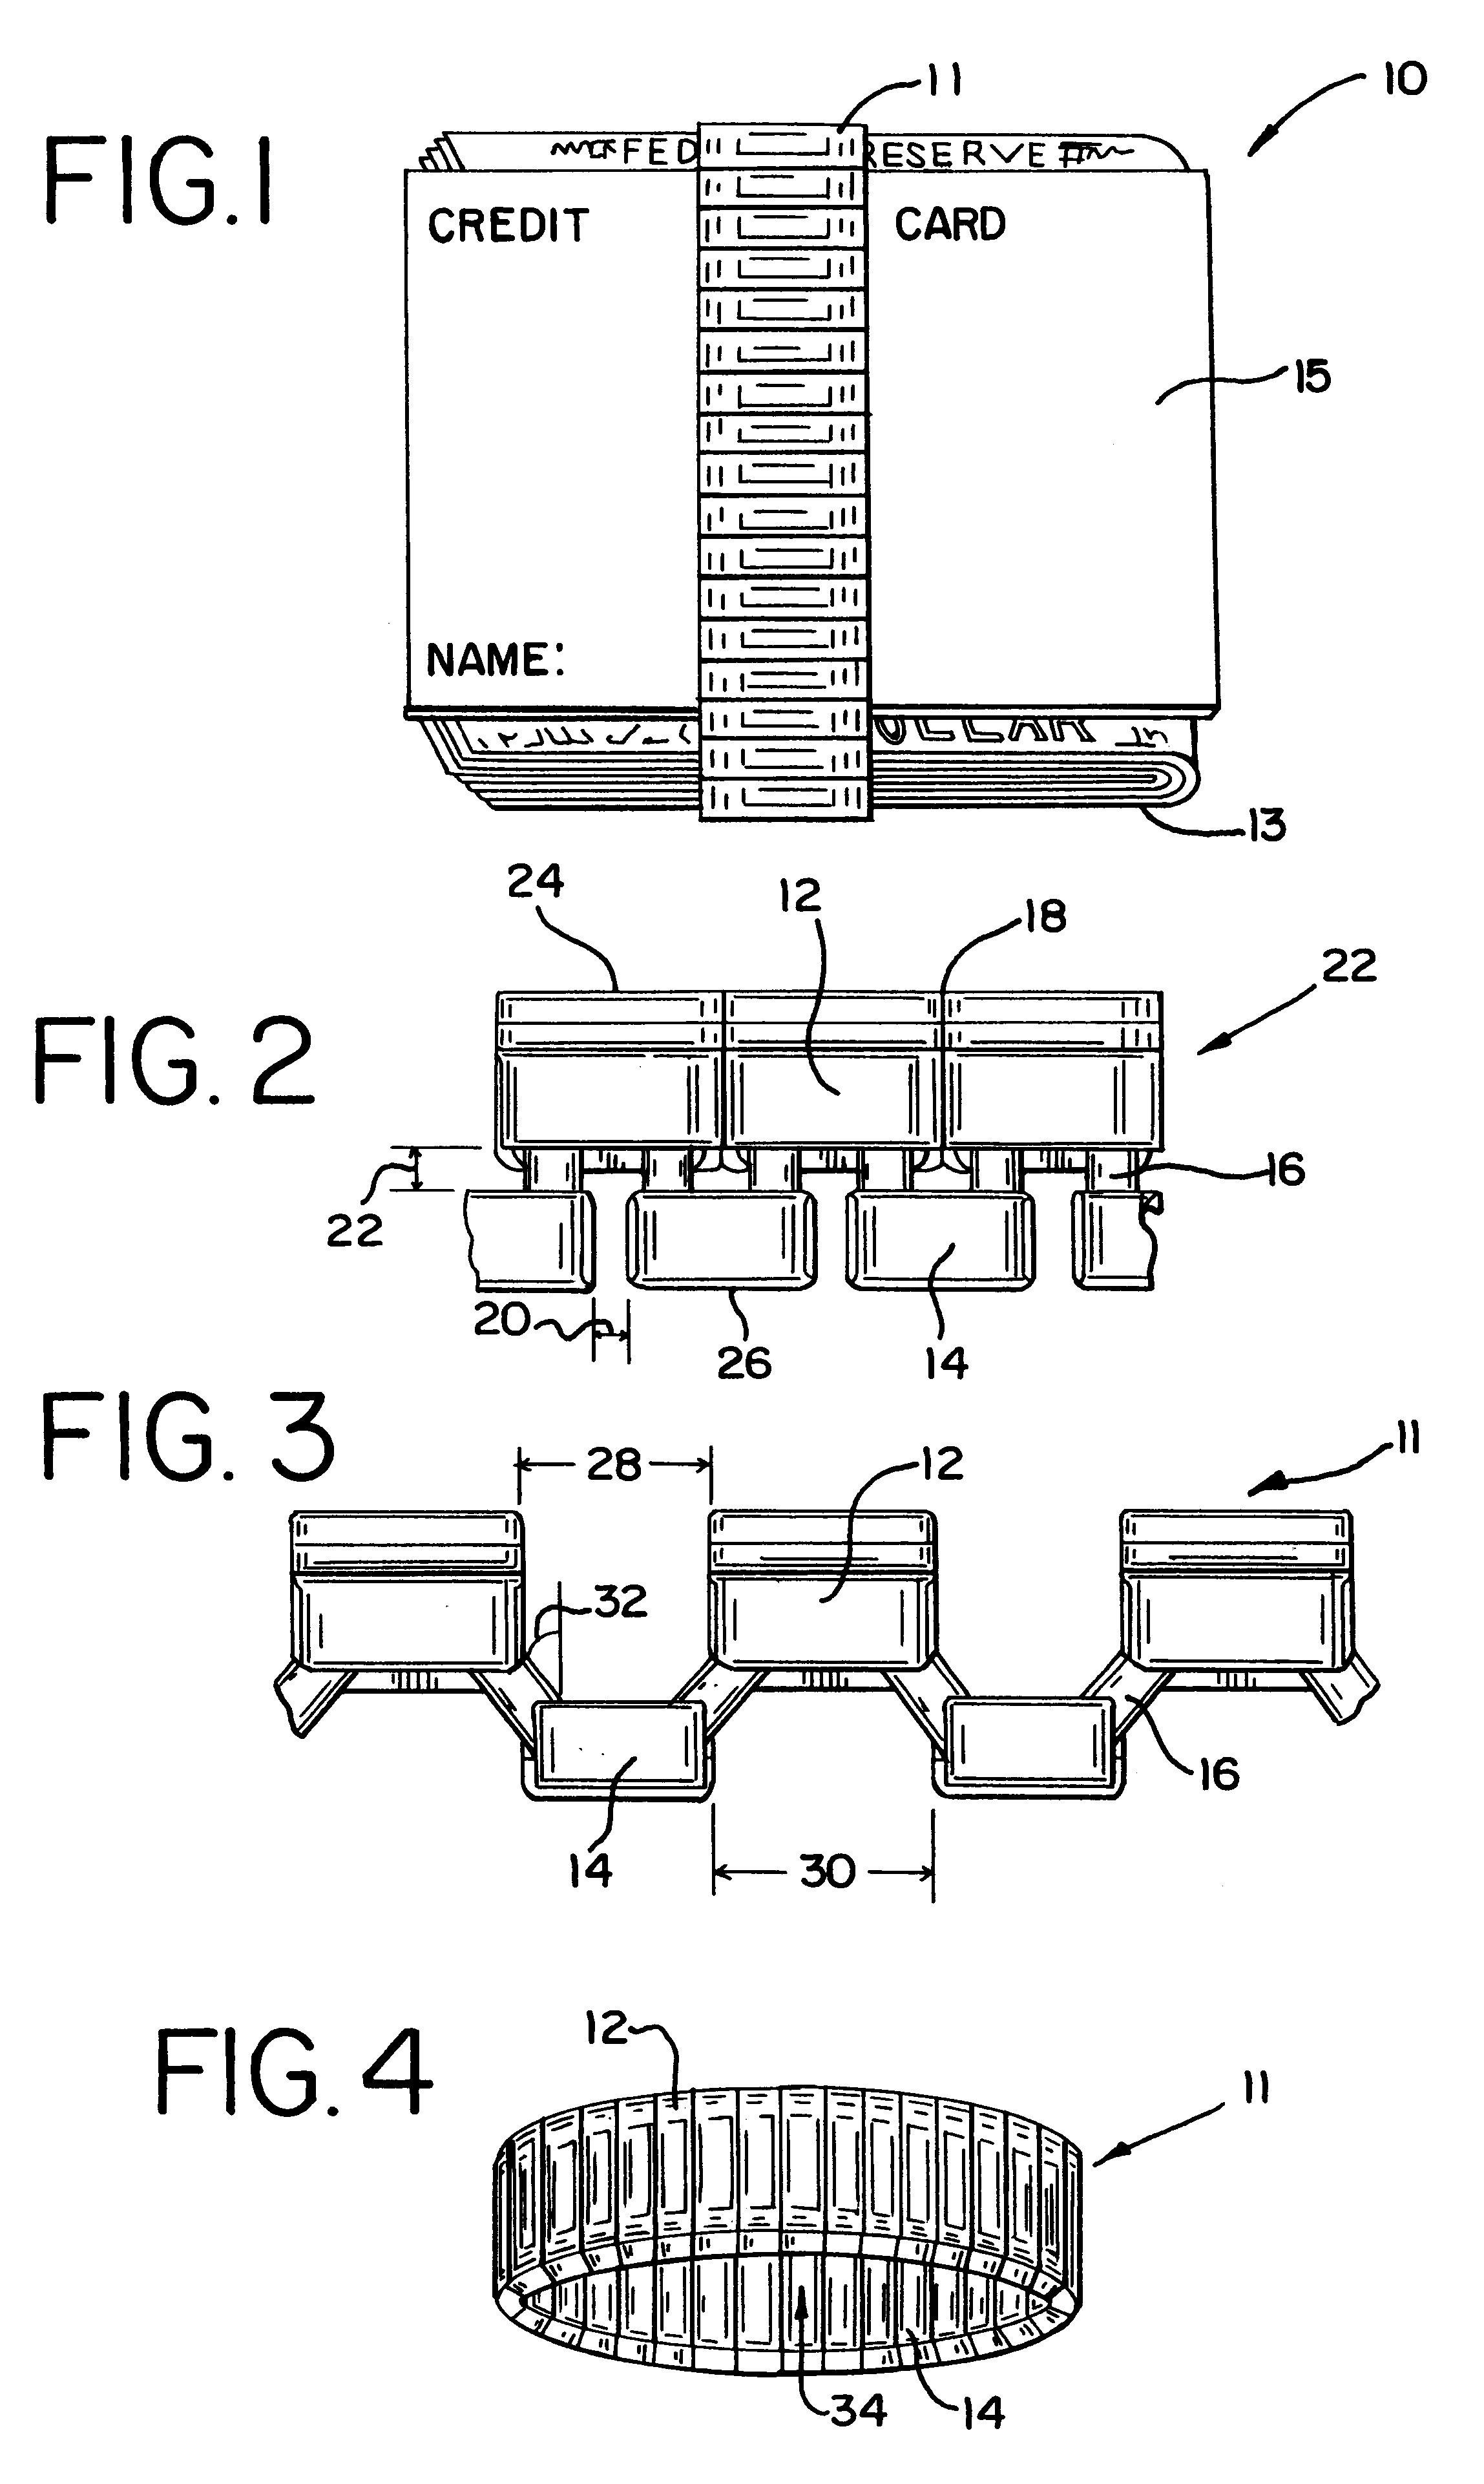 Method and apparatus for holding paper currency and credit cards